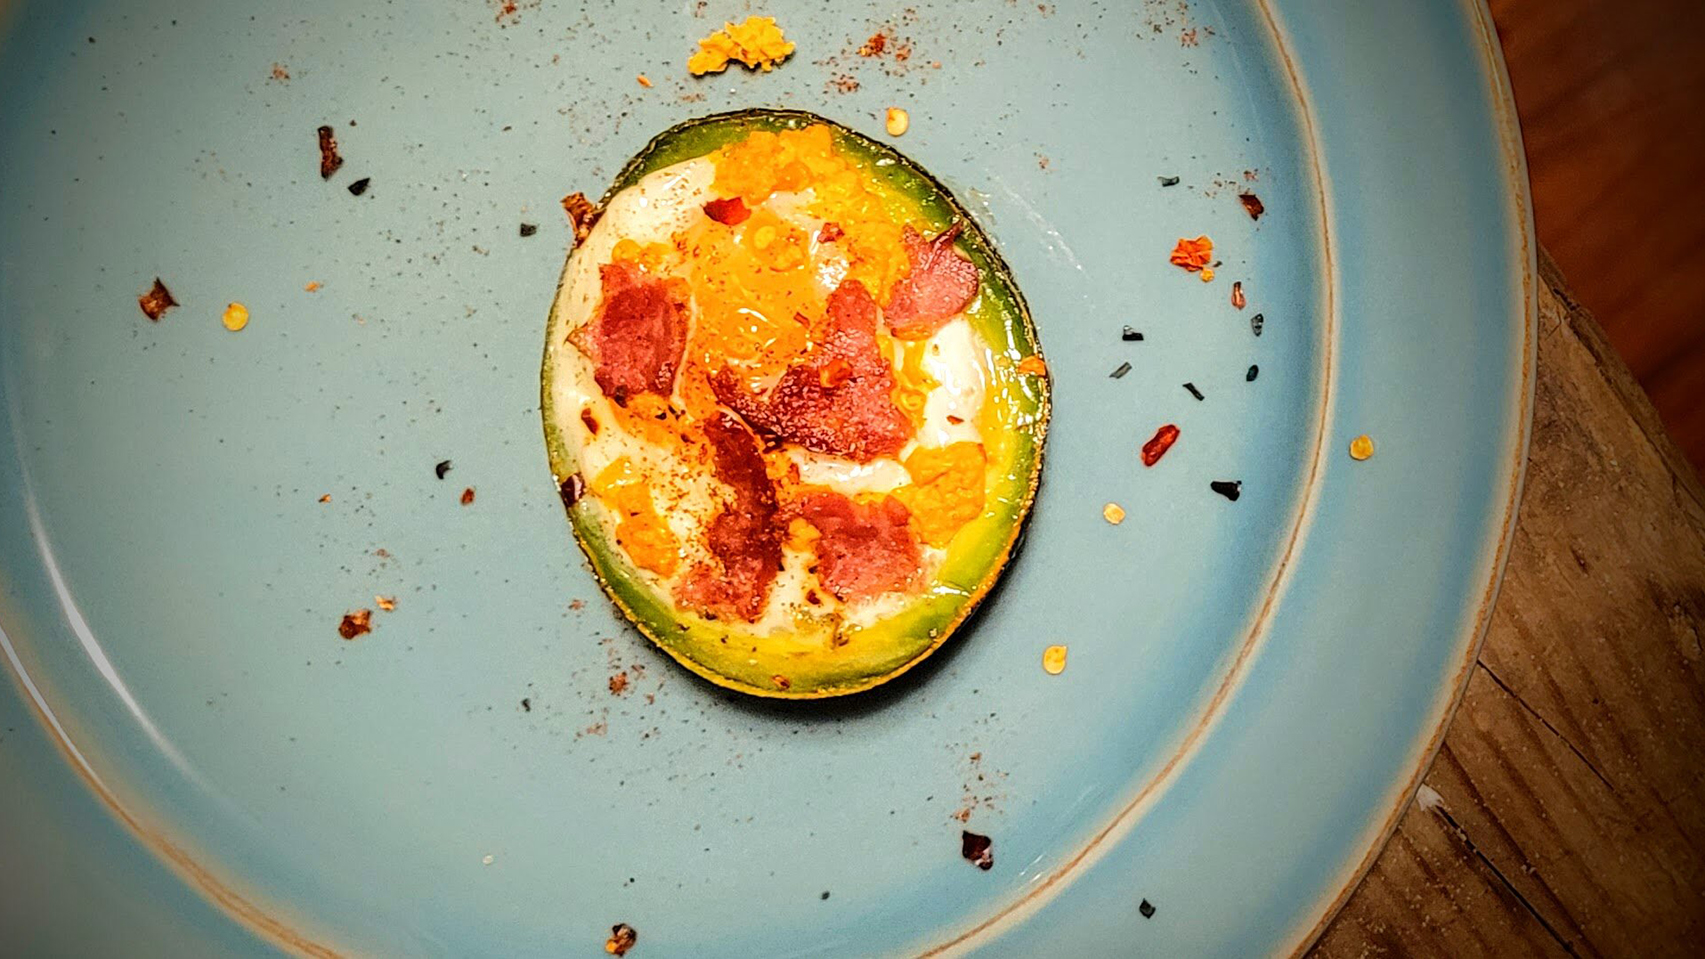 Baked egg avocado stuffed with goat cheese